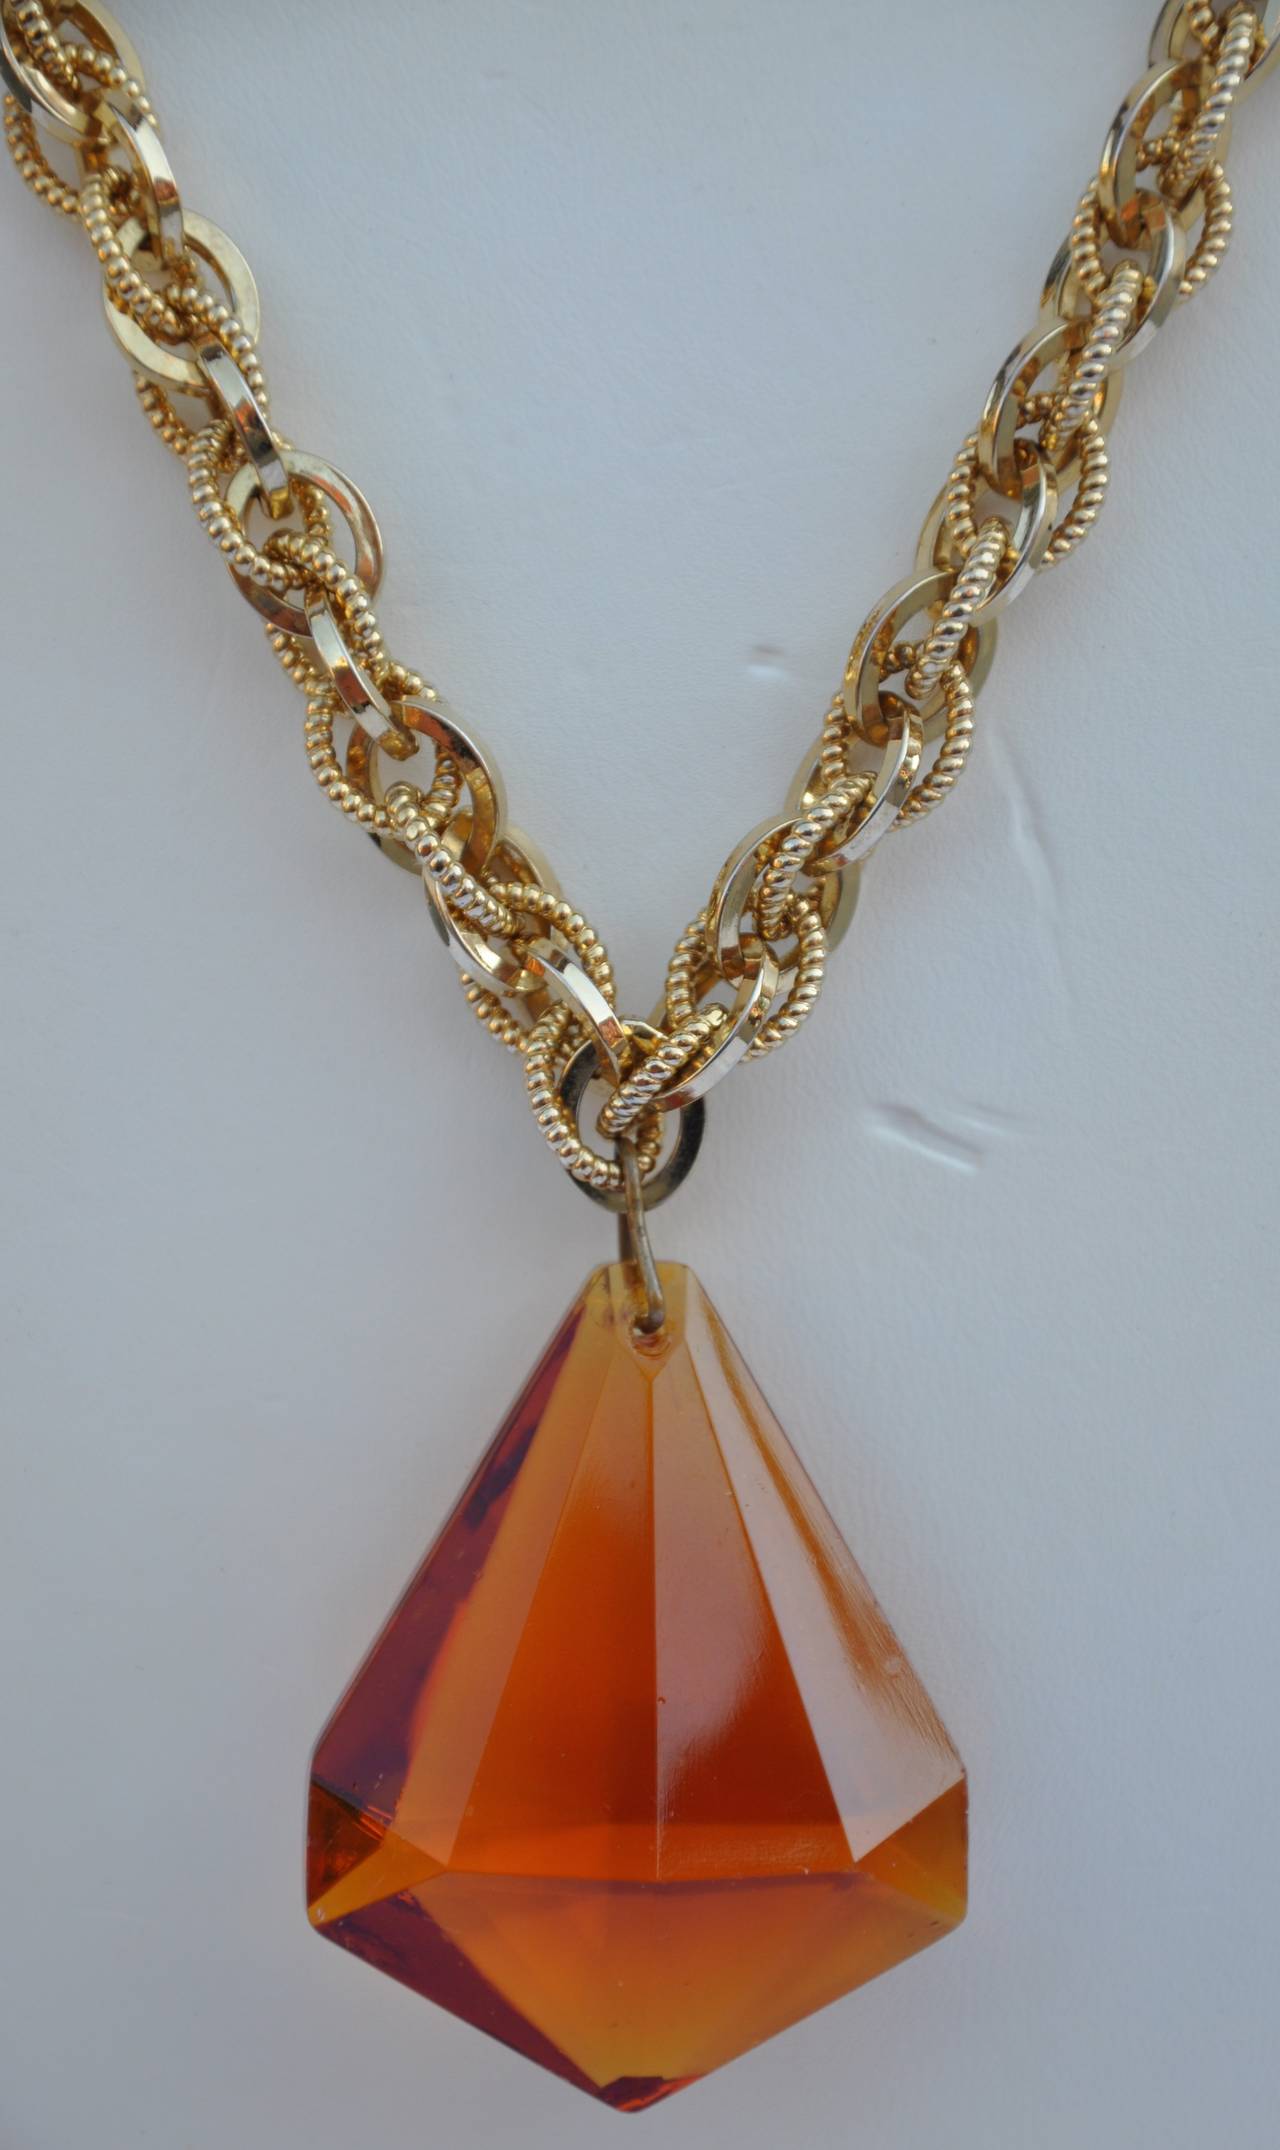 This large amber-tone lucite "Diamond" pendant measures 2" in height, 1 5/8" in length across the bottom and 6/8" in depth. The multi-textured gilded gold hardware necklace measures 18" in length.